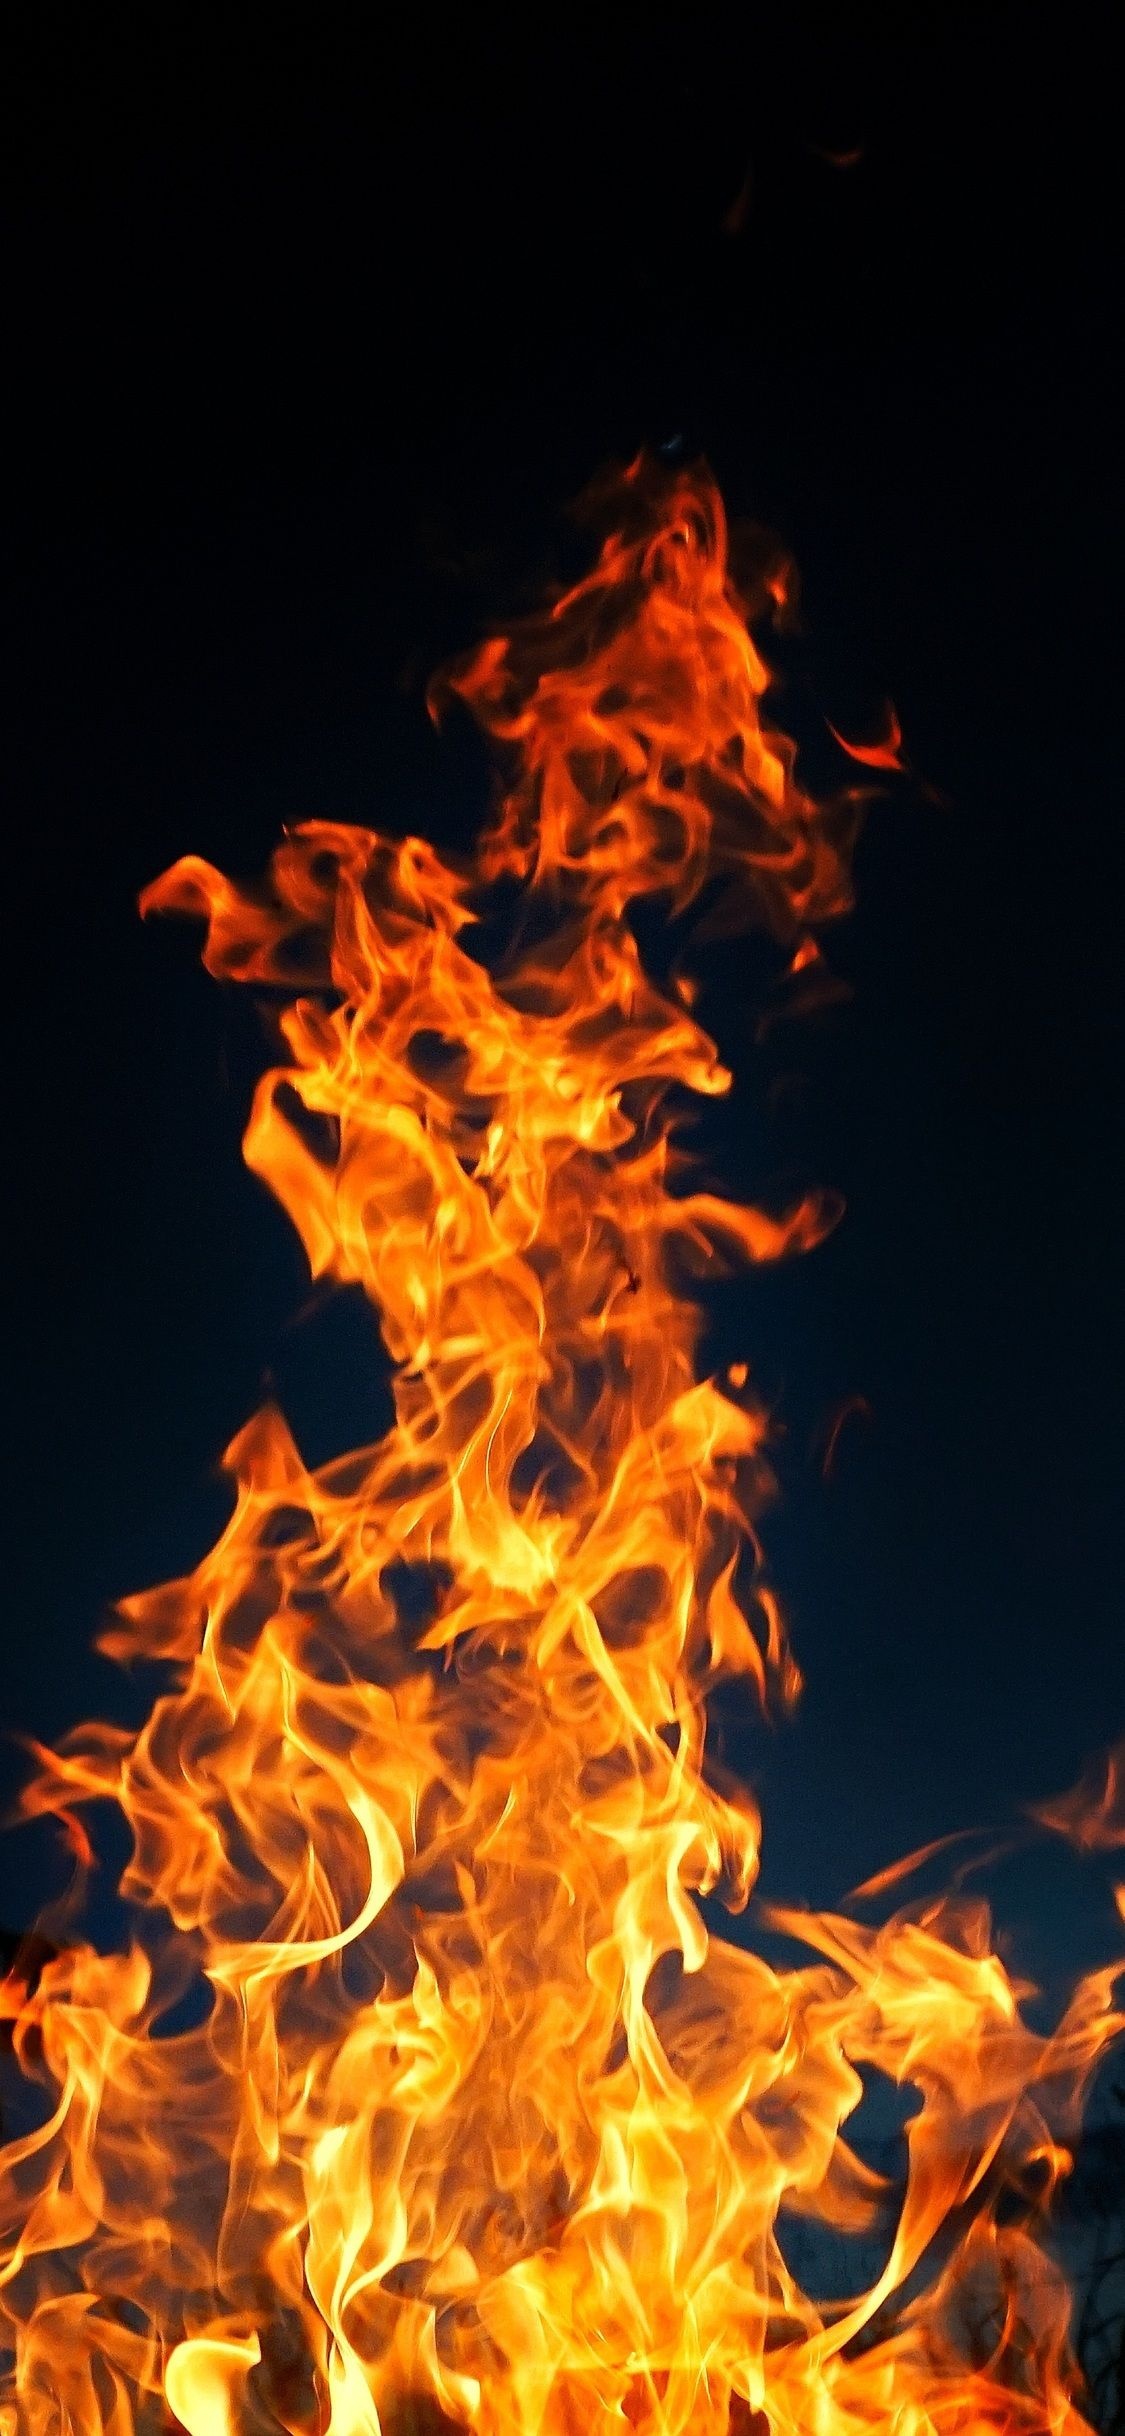 Android fire wallpapers, Fiery intensity, Burning passion, Explosive energy, Sizzling visuals, 1130x2440 HD Handy